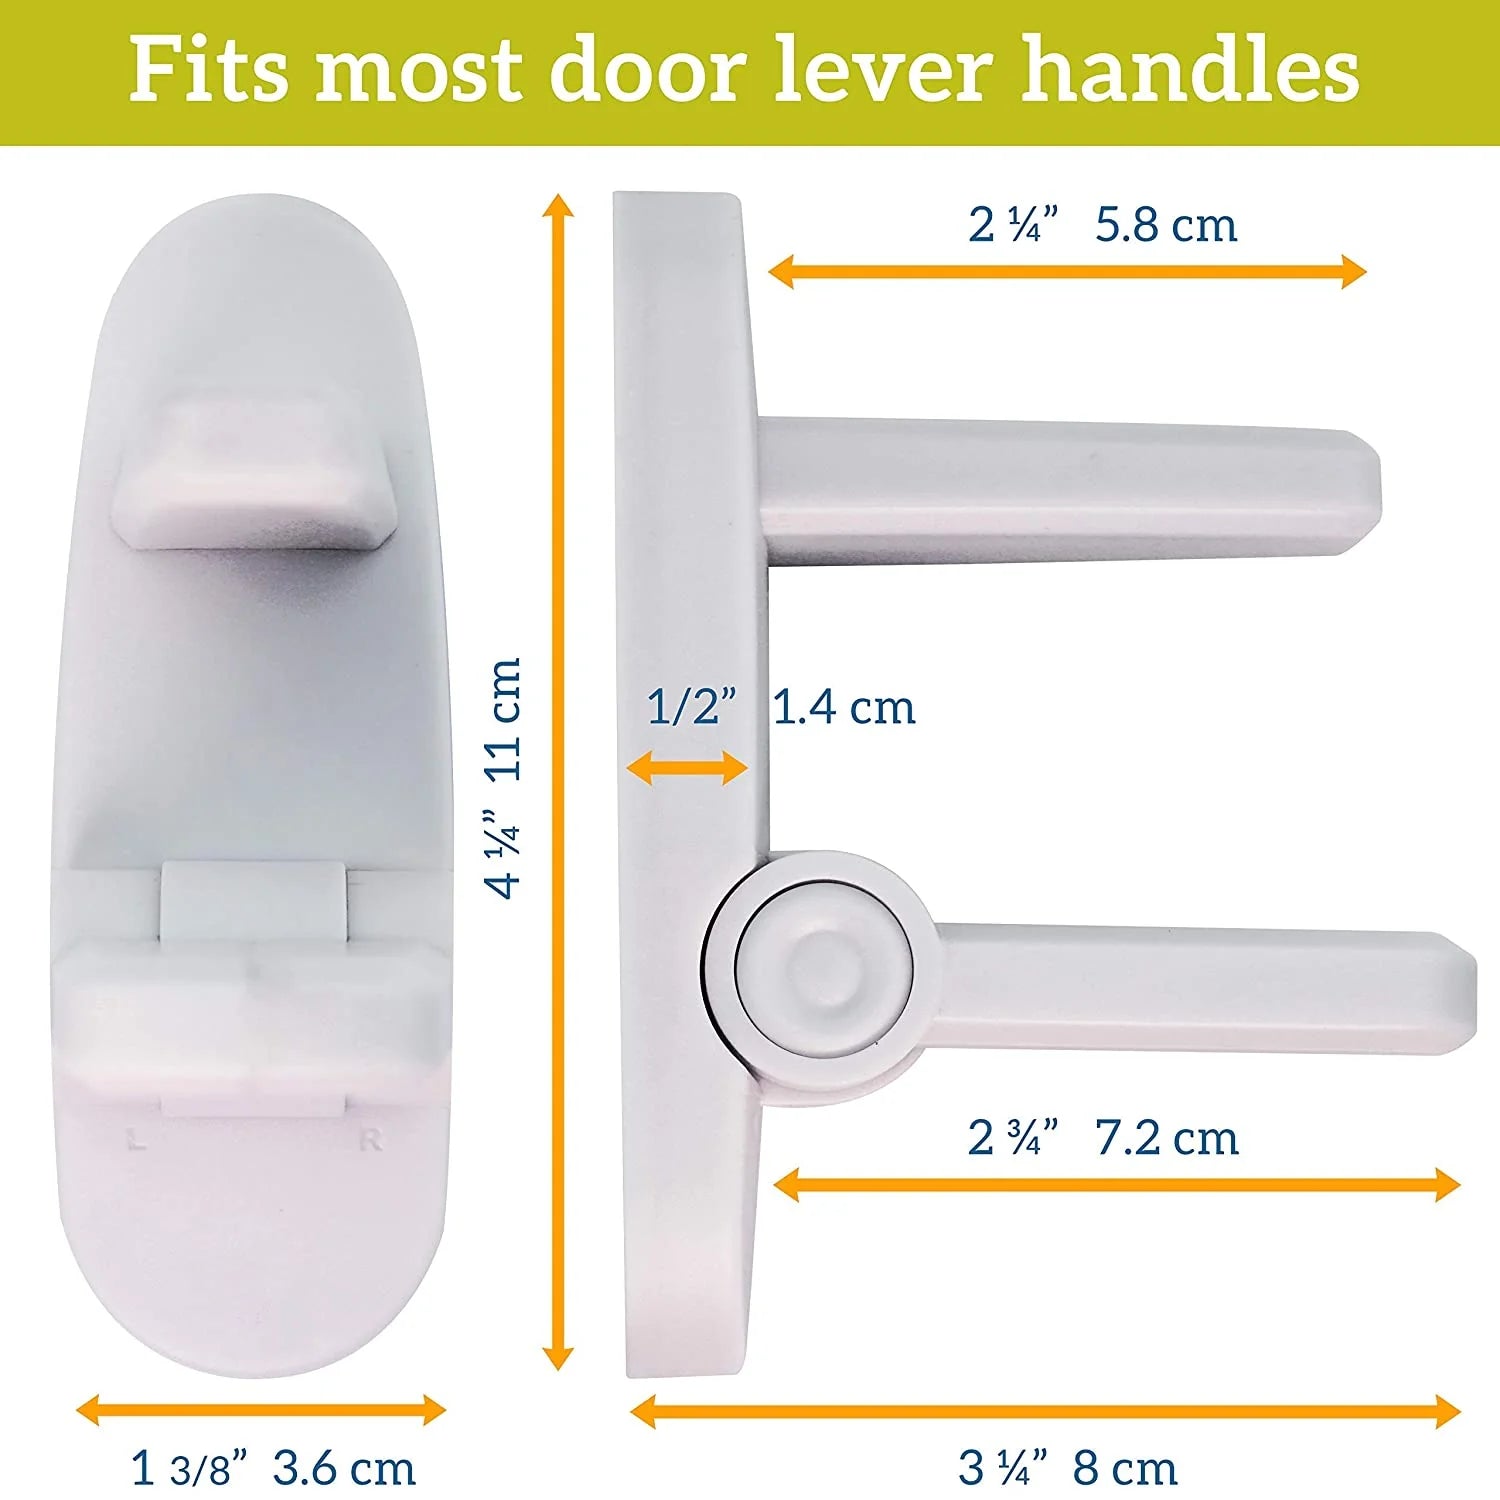 Improved Childproof Door Lever Lock. Prevents Toddlers from Opening Doors | 2 PACK